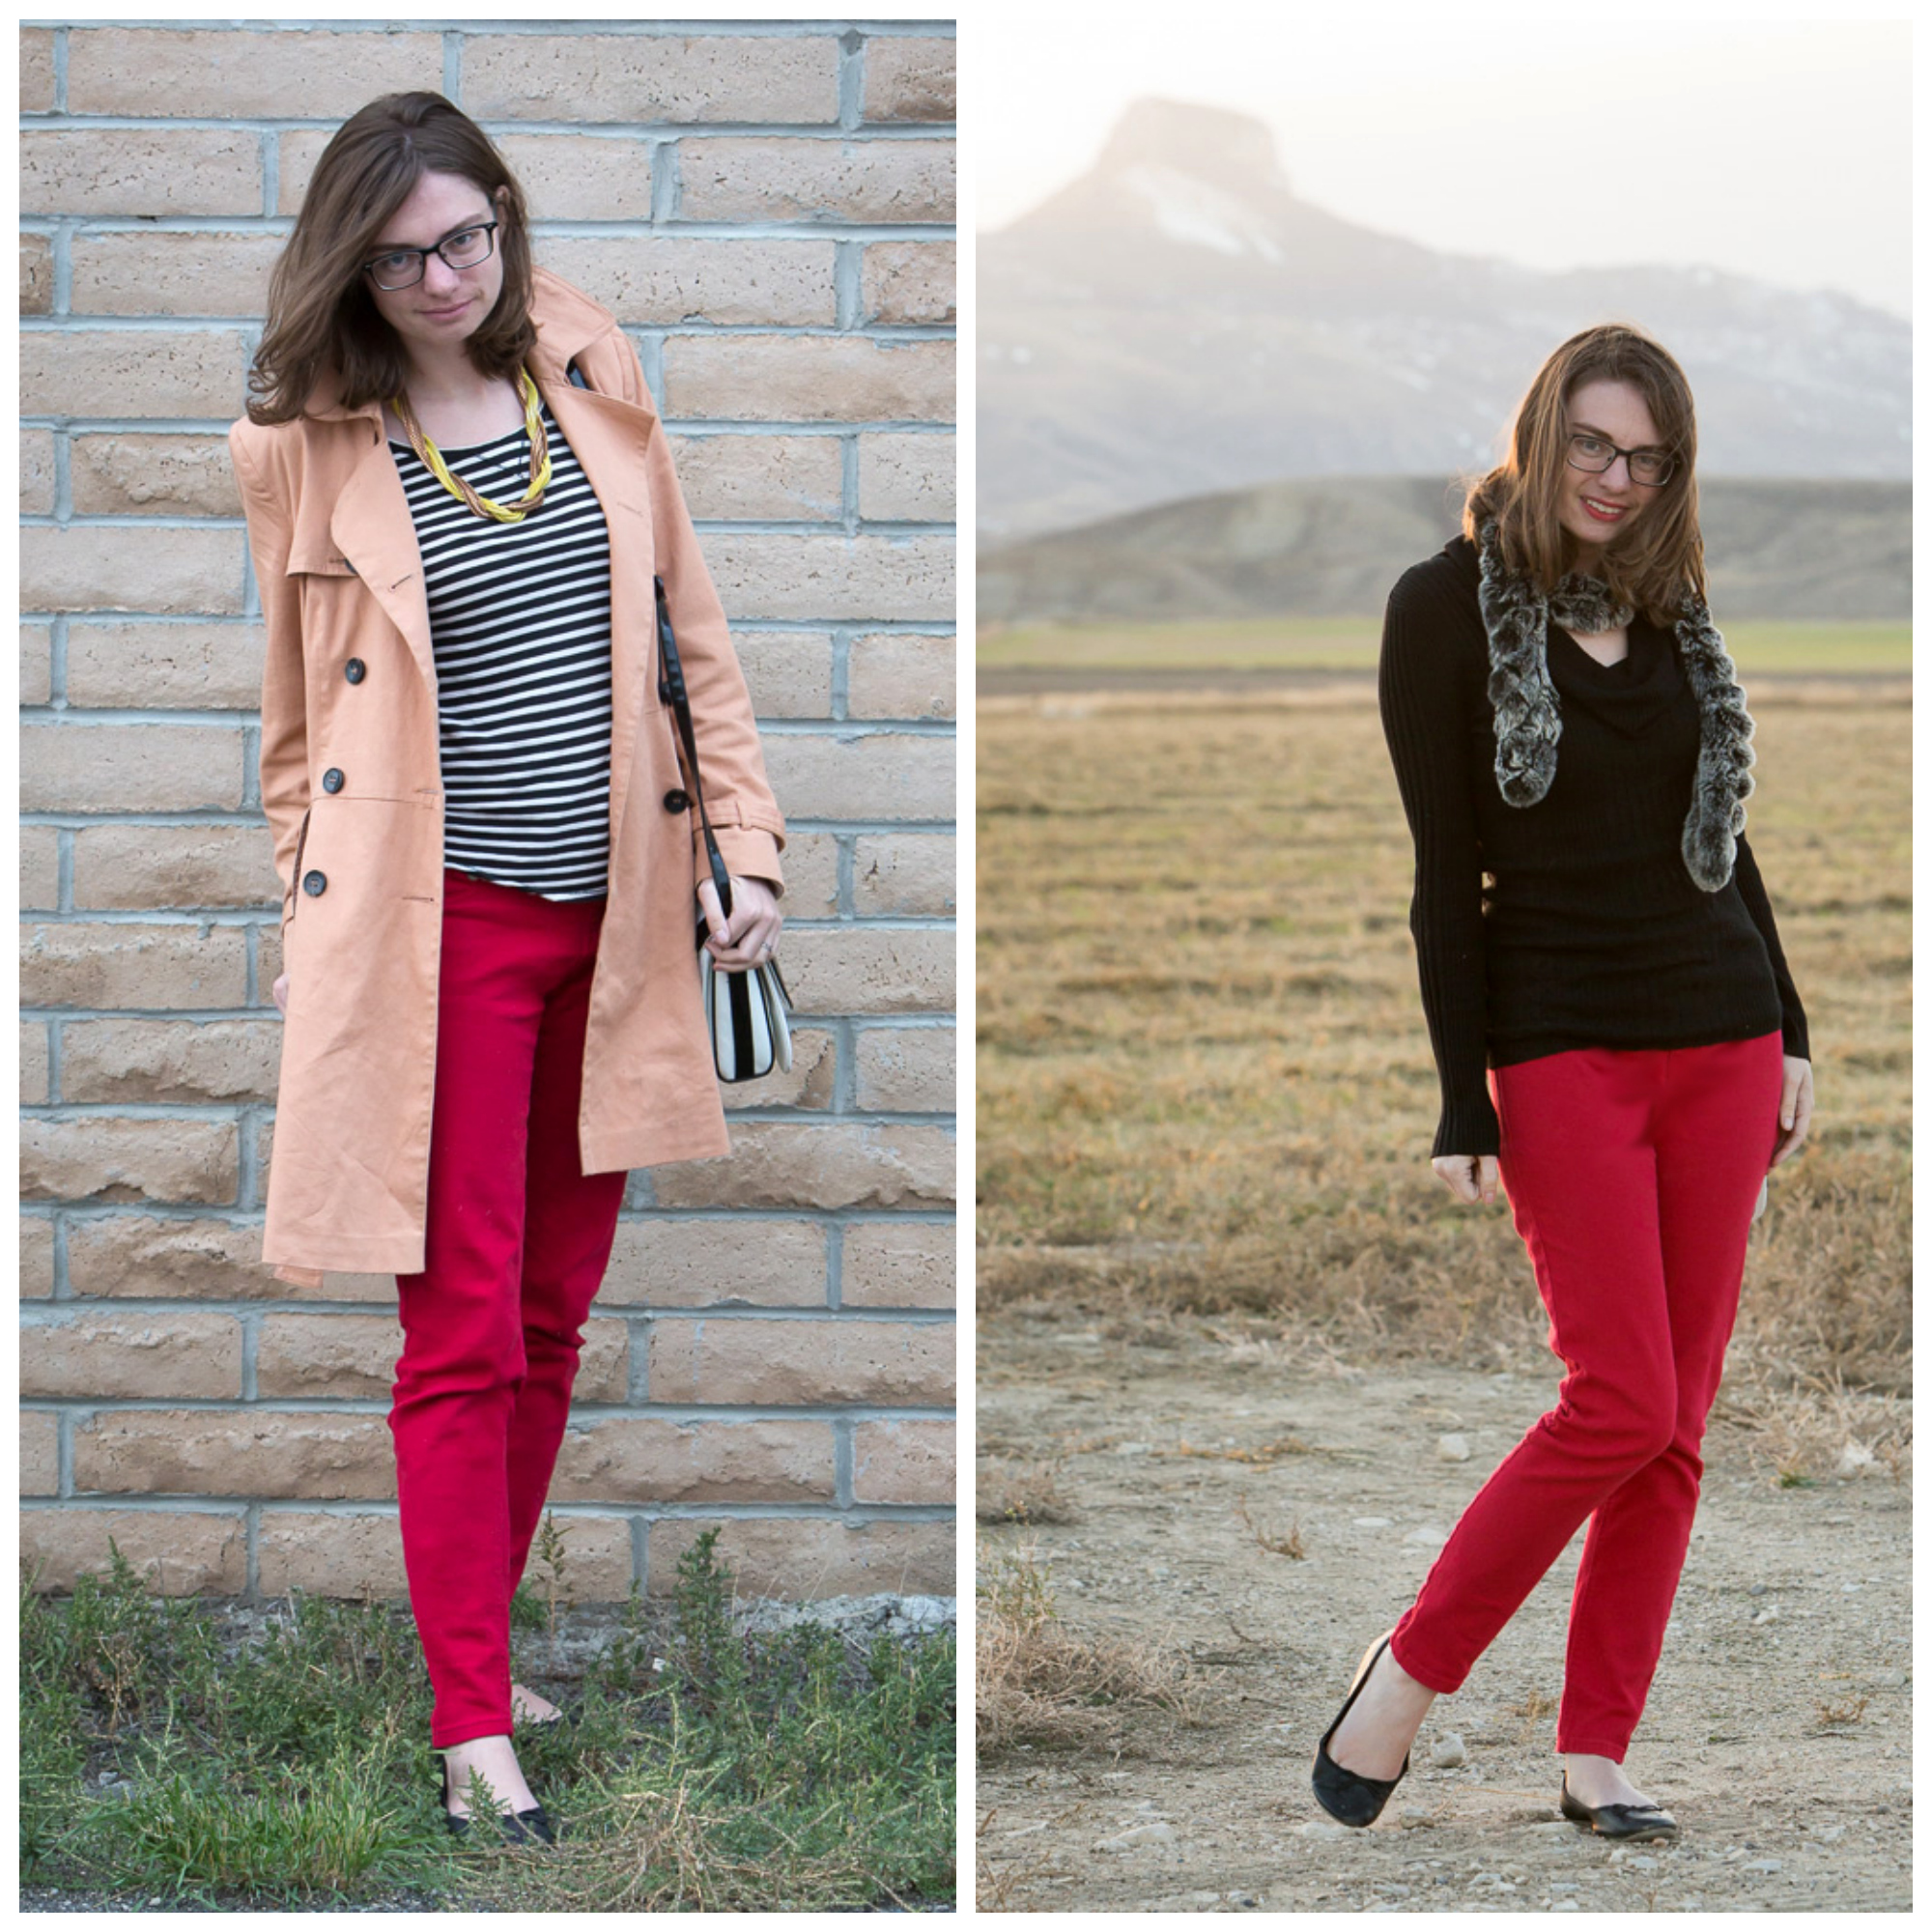 remix, red jeans, trench coat, striped shirt, black sweater, fur, never fully dressed, withoutastyle, wyoming,